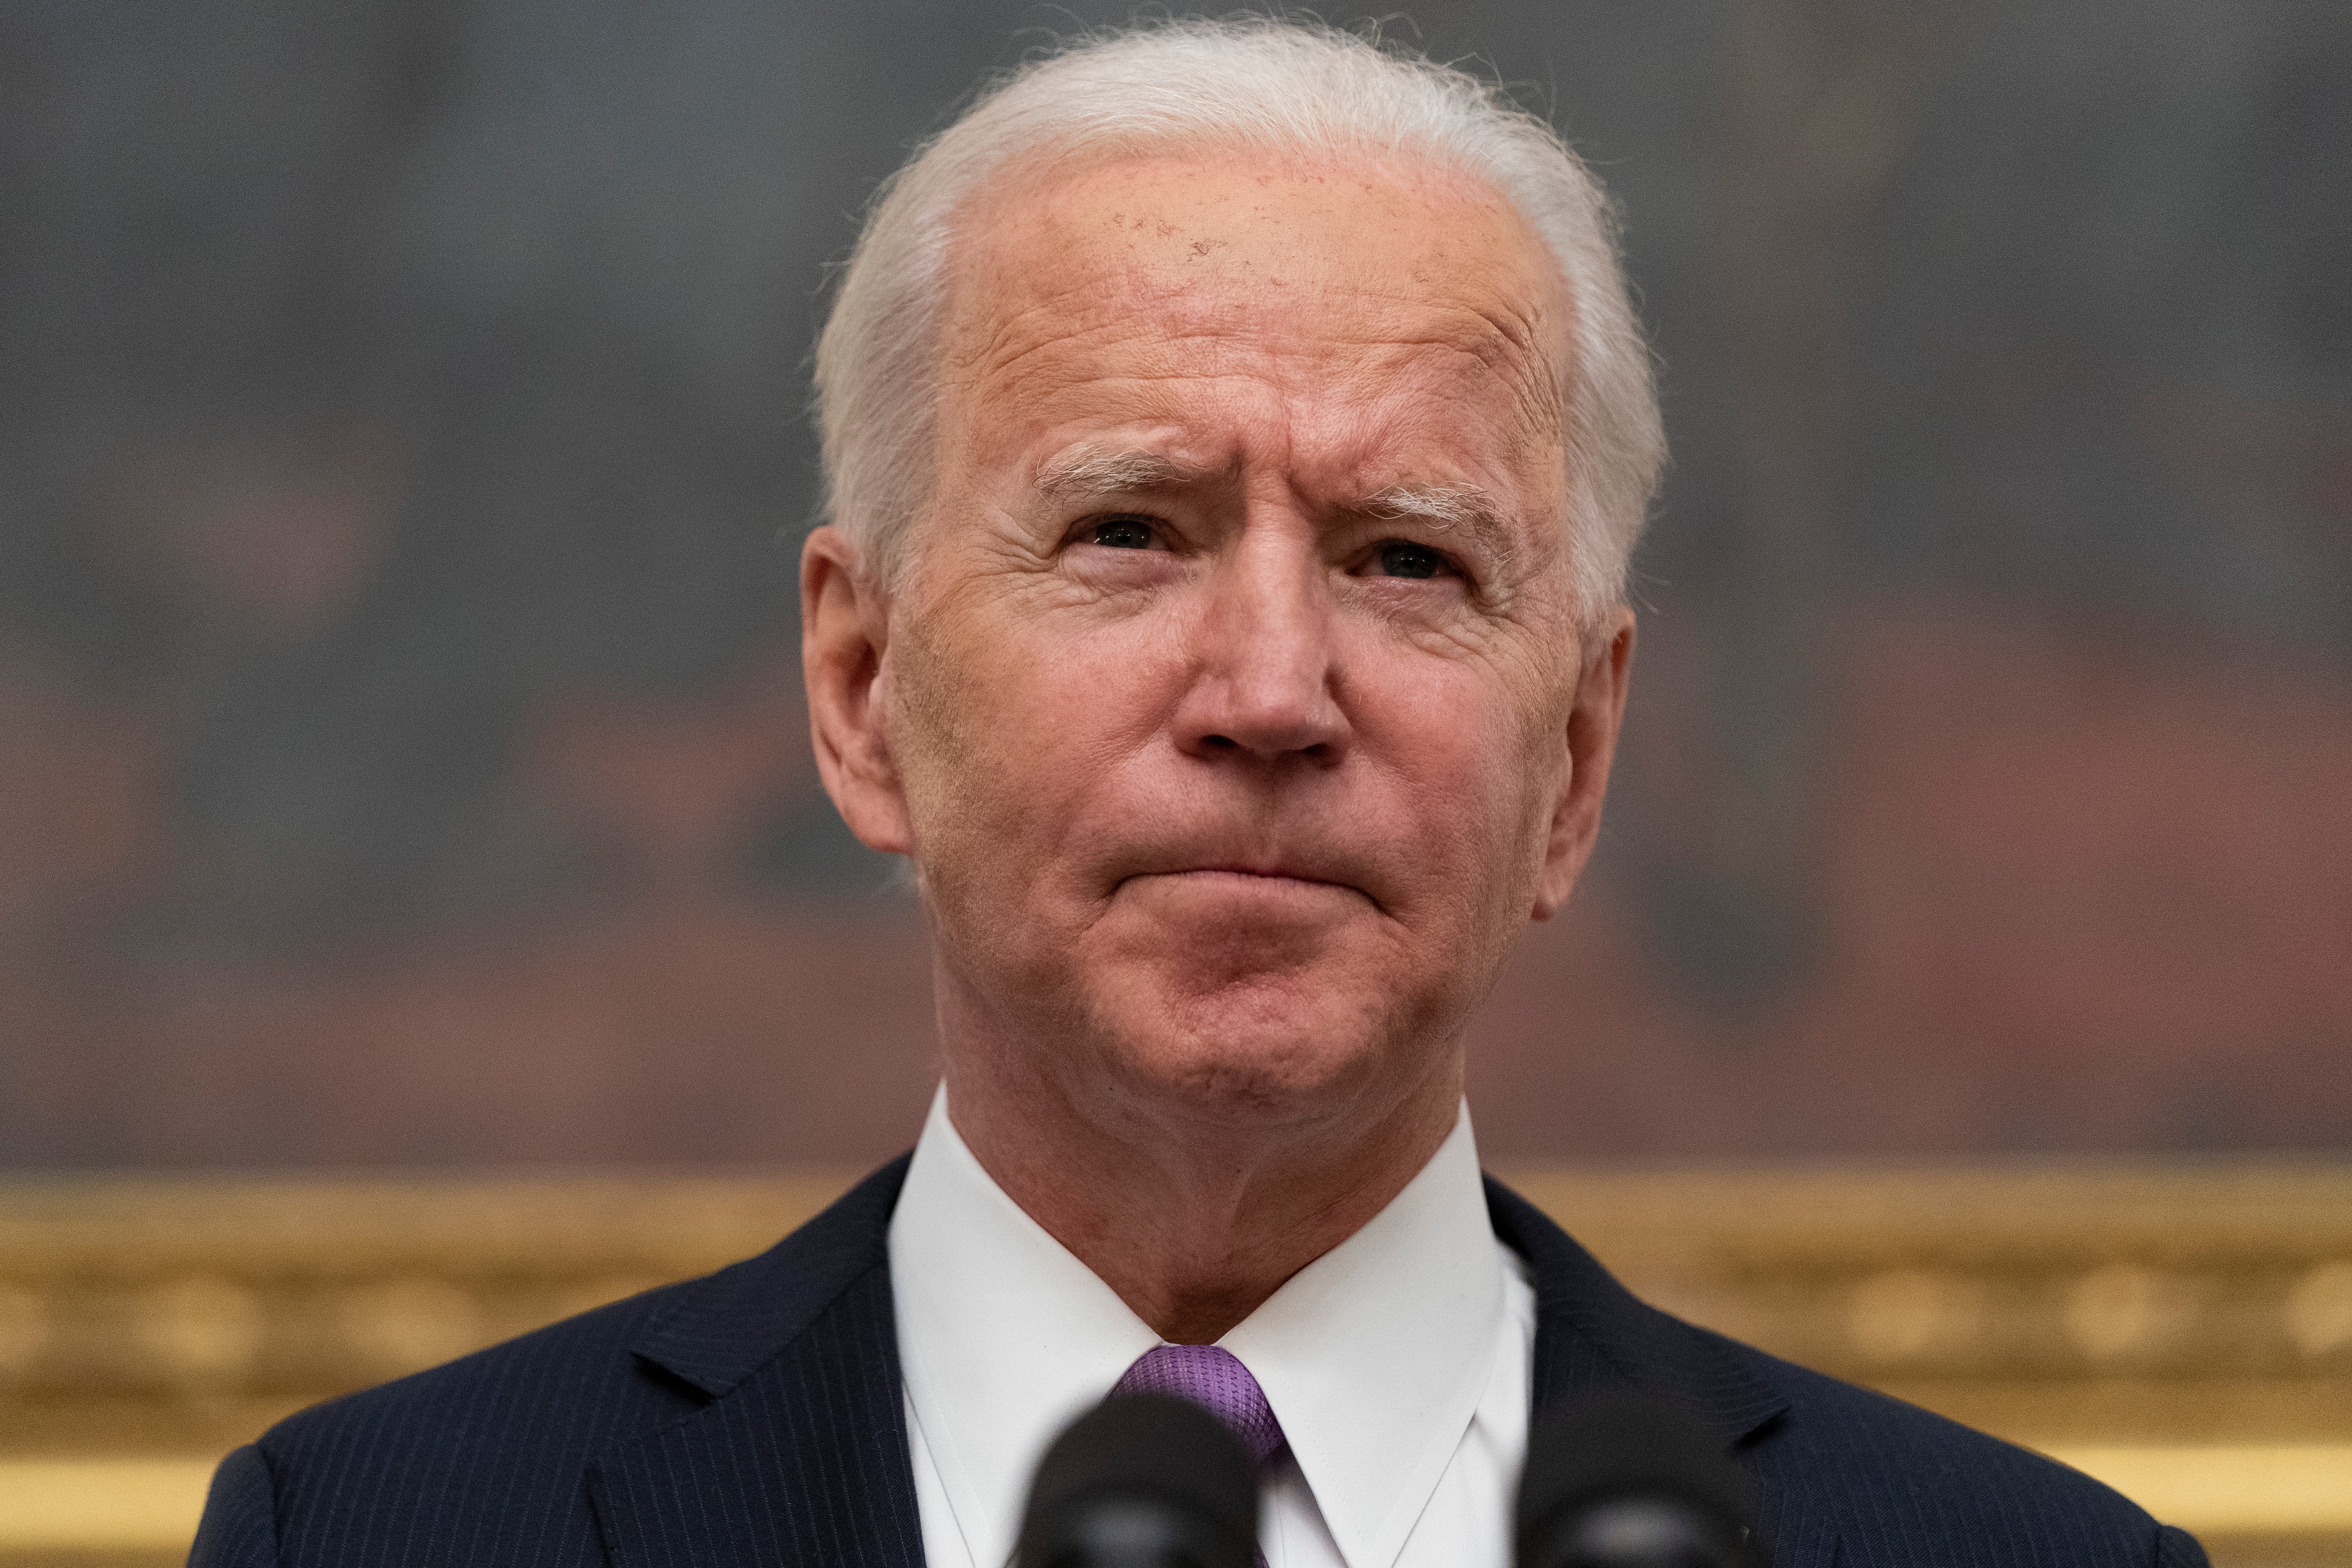 Biden says he'd 'strongly support' MLB moving All-Star game out of Atlanta over Georgia election law